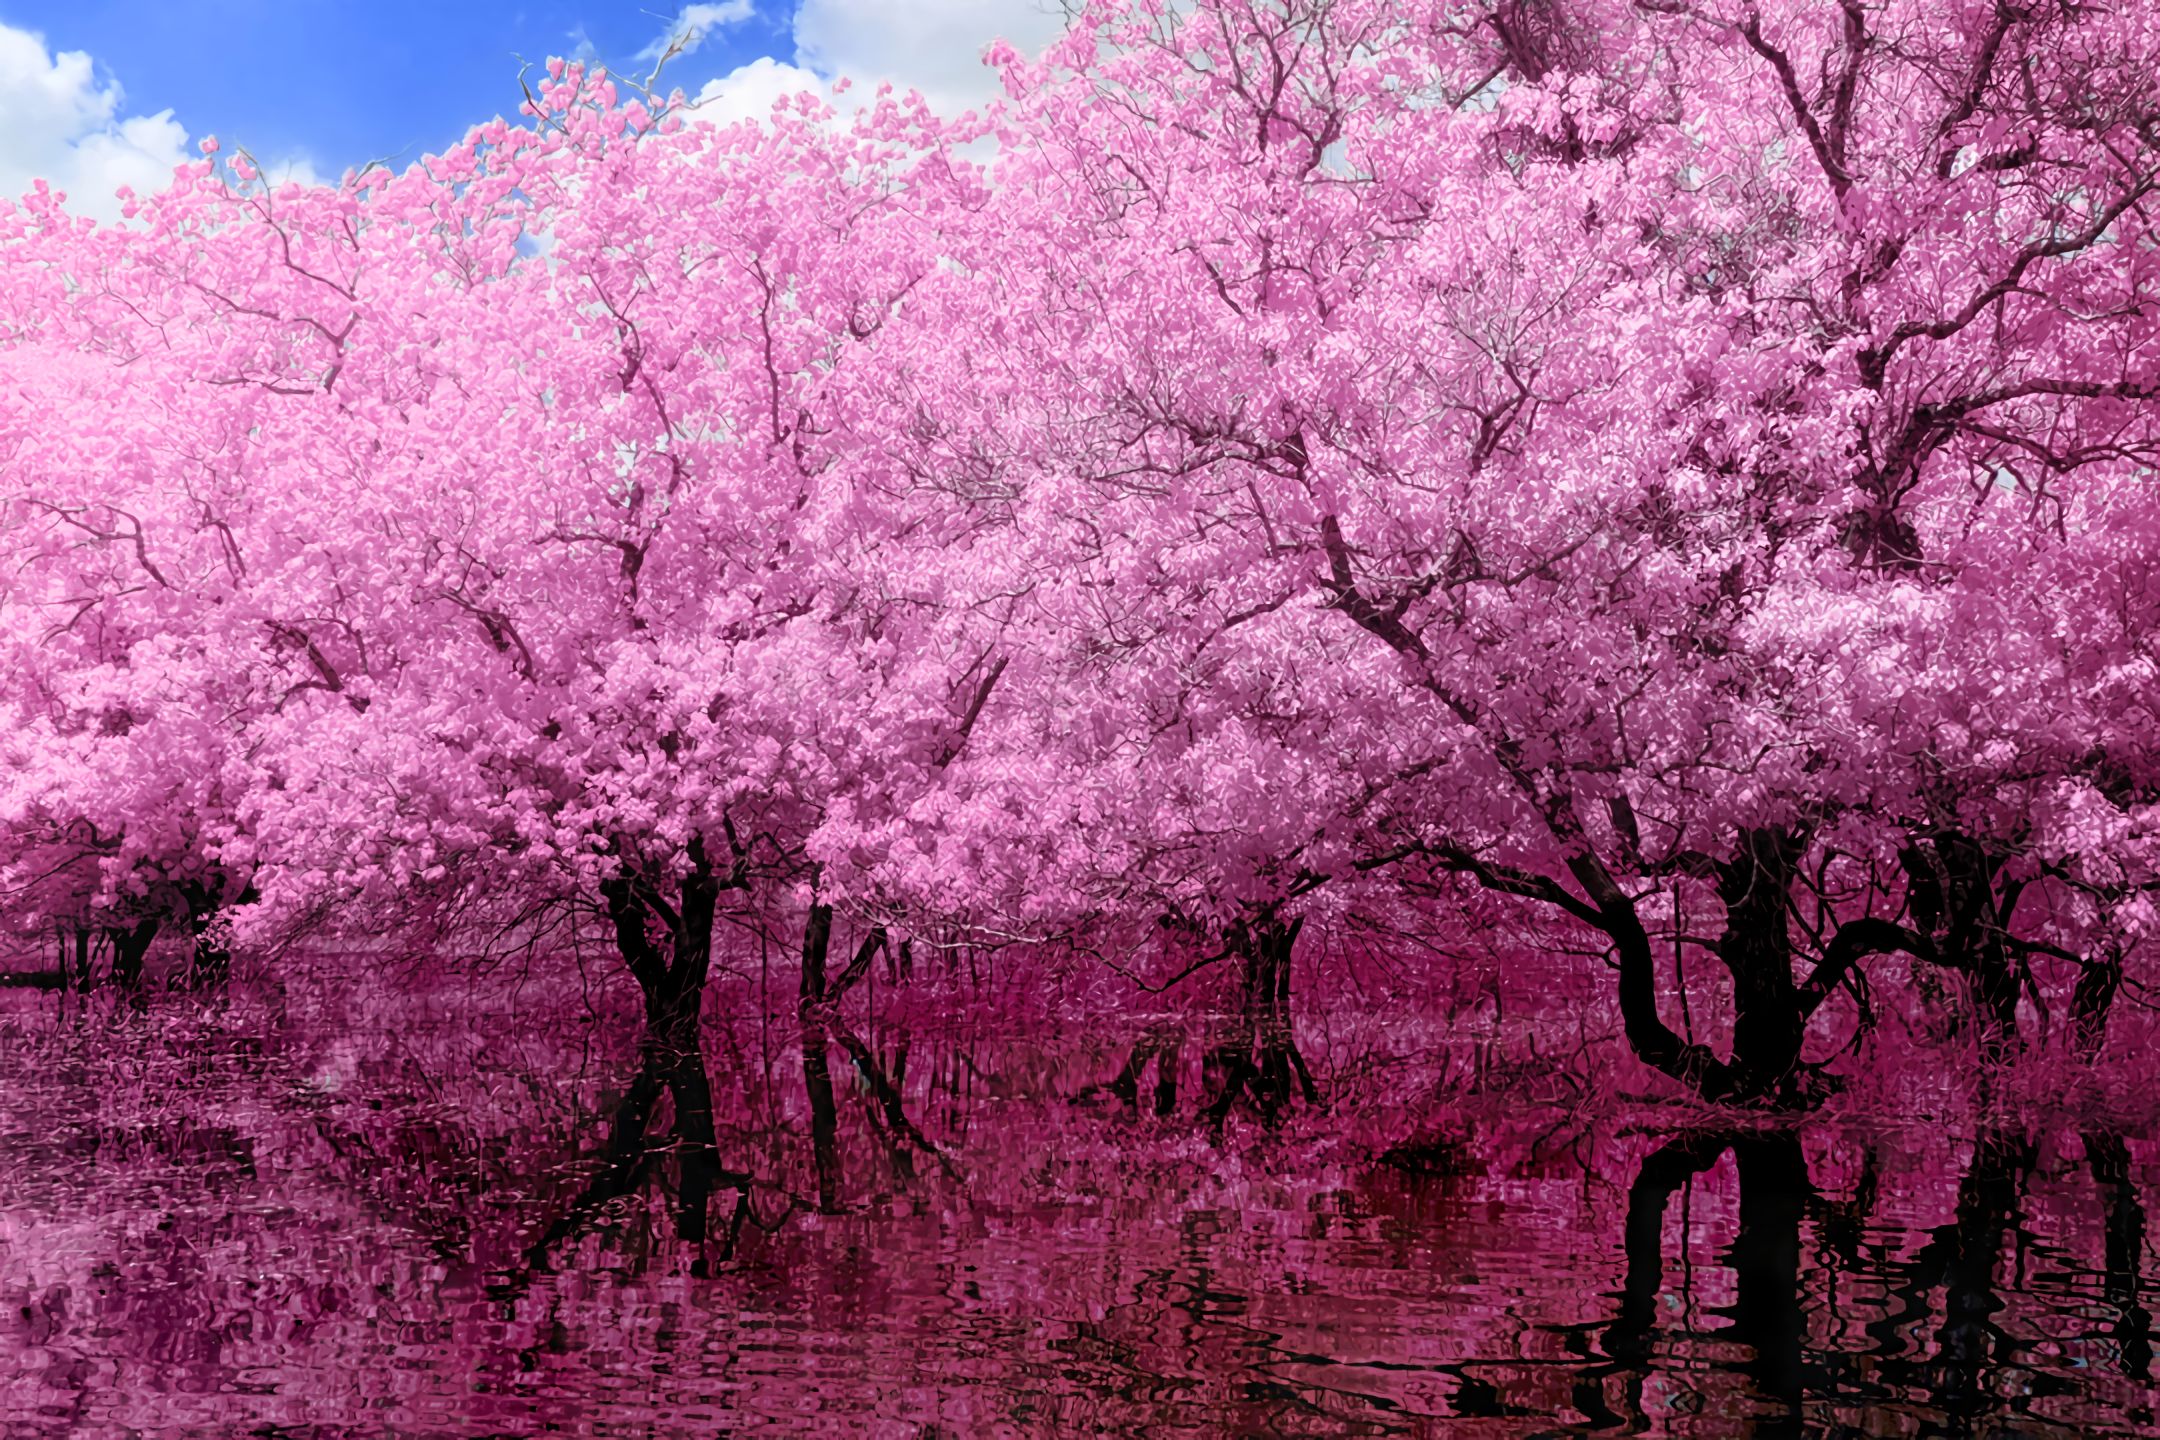 reflection, earth, blossom, pink flower, tree